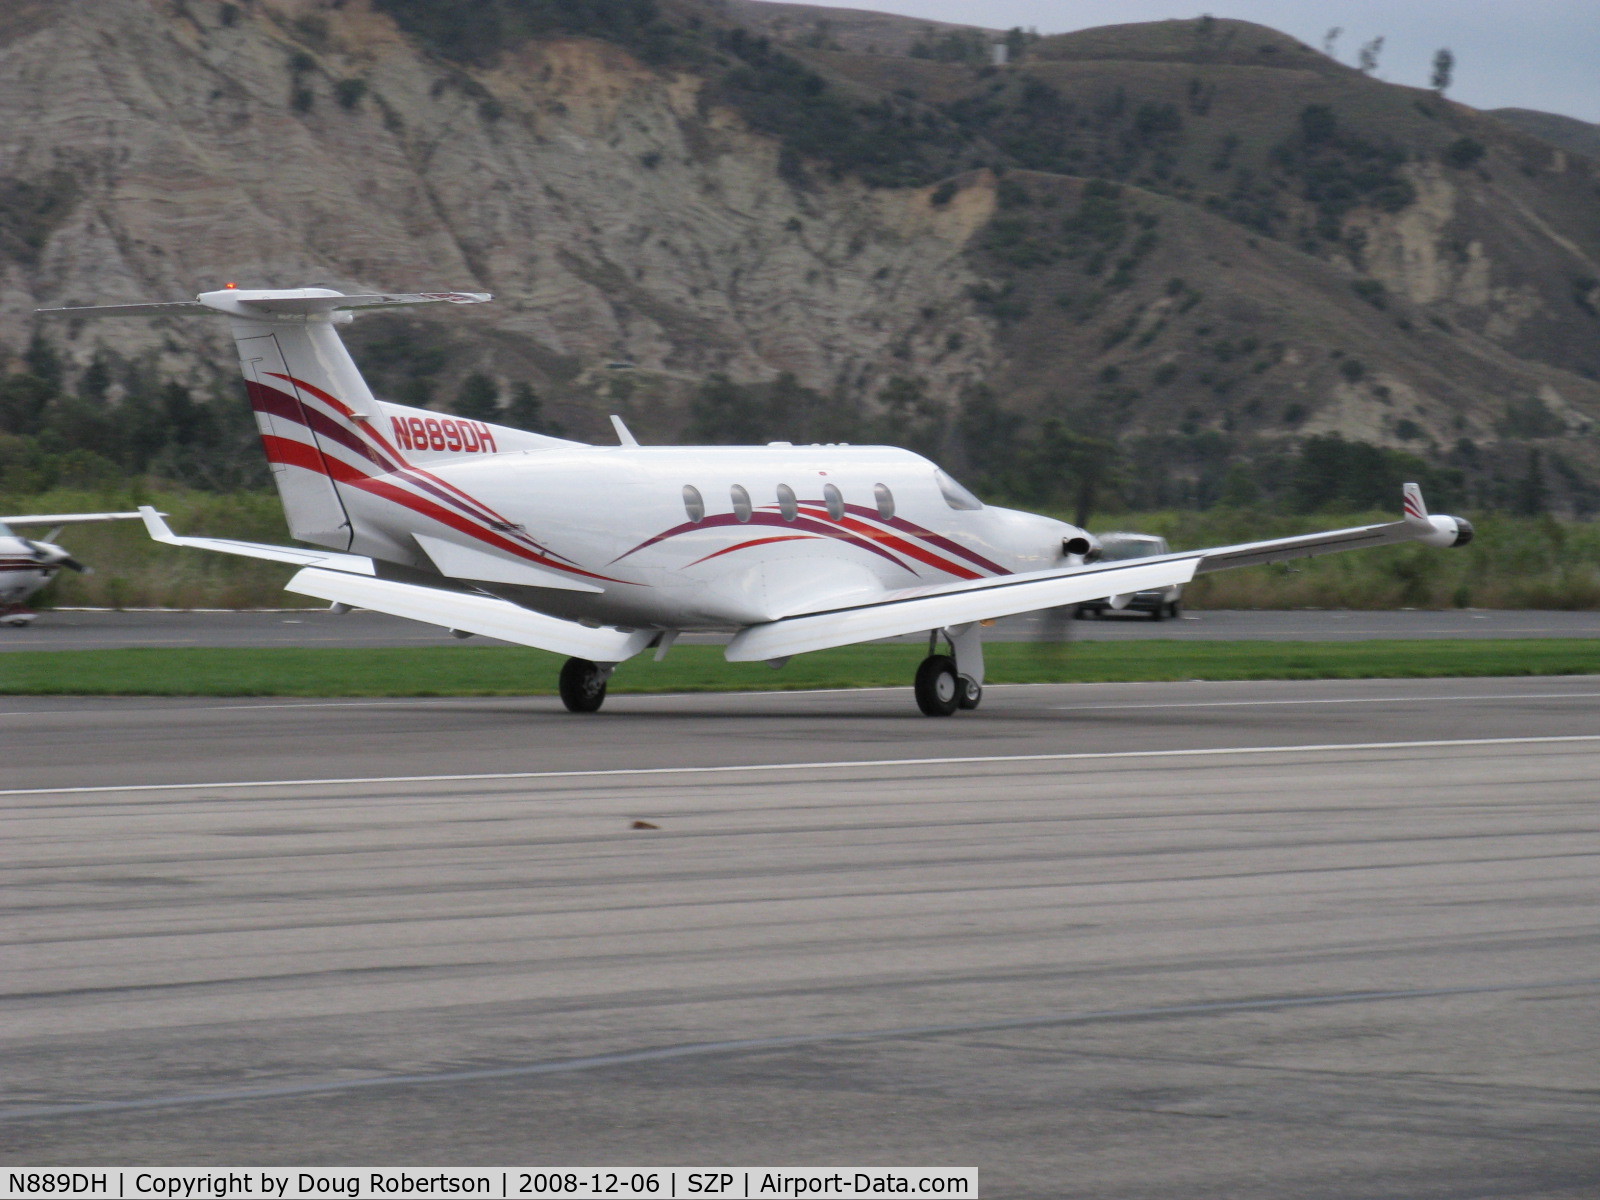 N889DH, 1999 Pilatus PC-12/45 C/N 298, 2005 Pilatus PC-12/45, one 1,605 shp Pratt & Whitney (Canada) PT6A-67B Turboprop flat rated at 1,200 shp for takeoff, 1.000 shp continuous, max speed 311 mph at 25,000 ft. Fuel- 407 US gallons, 402 usable, distinctive T tail, note: winglets, landing roll 